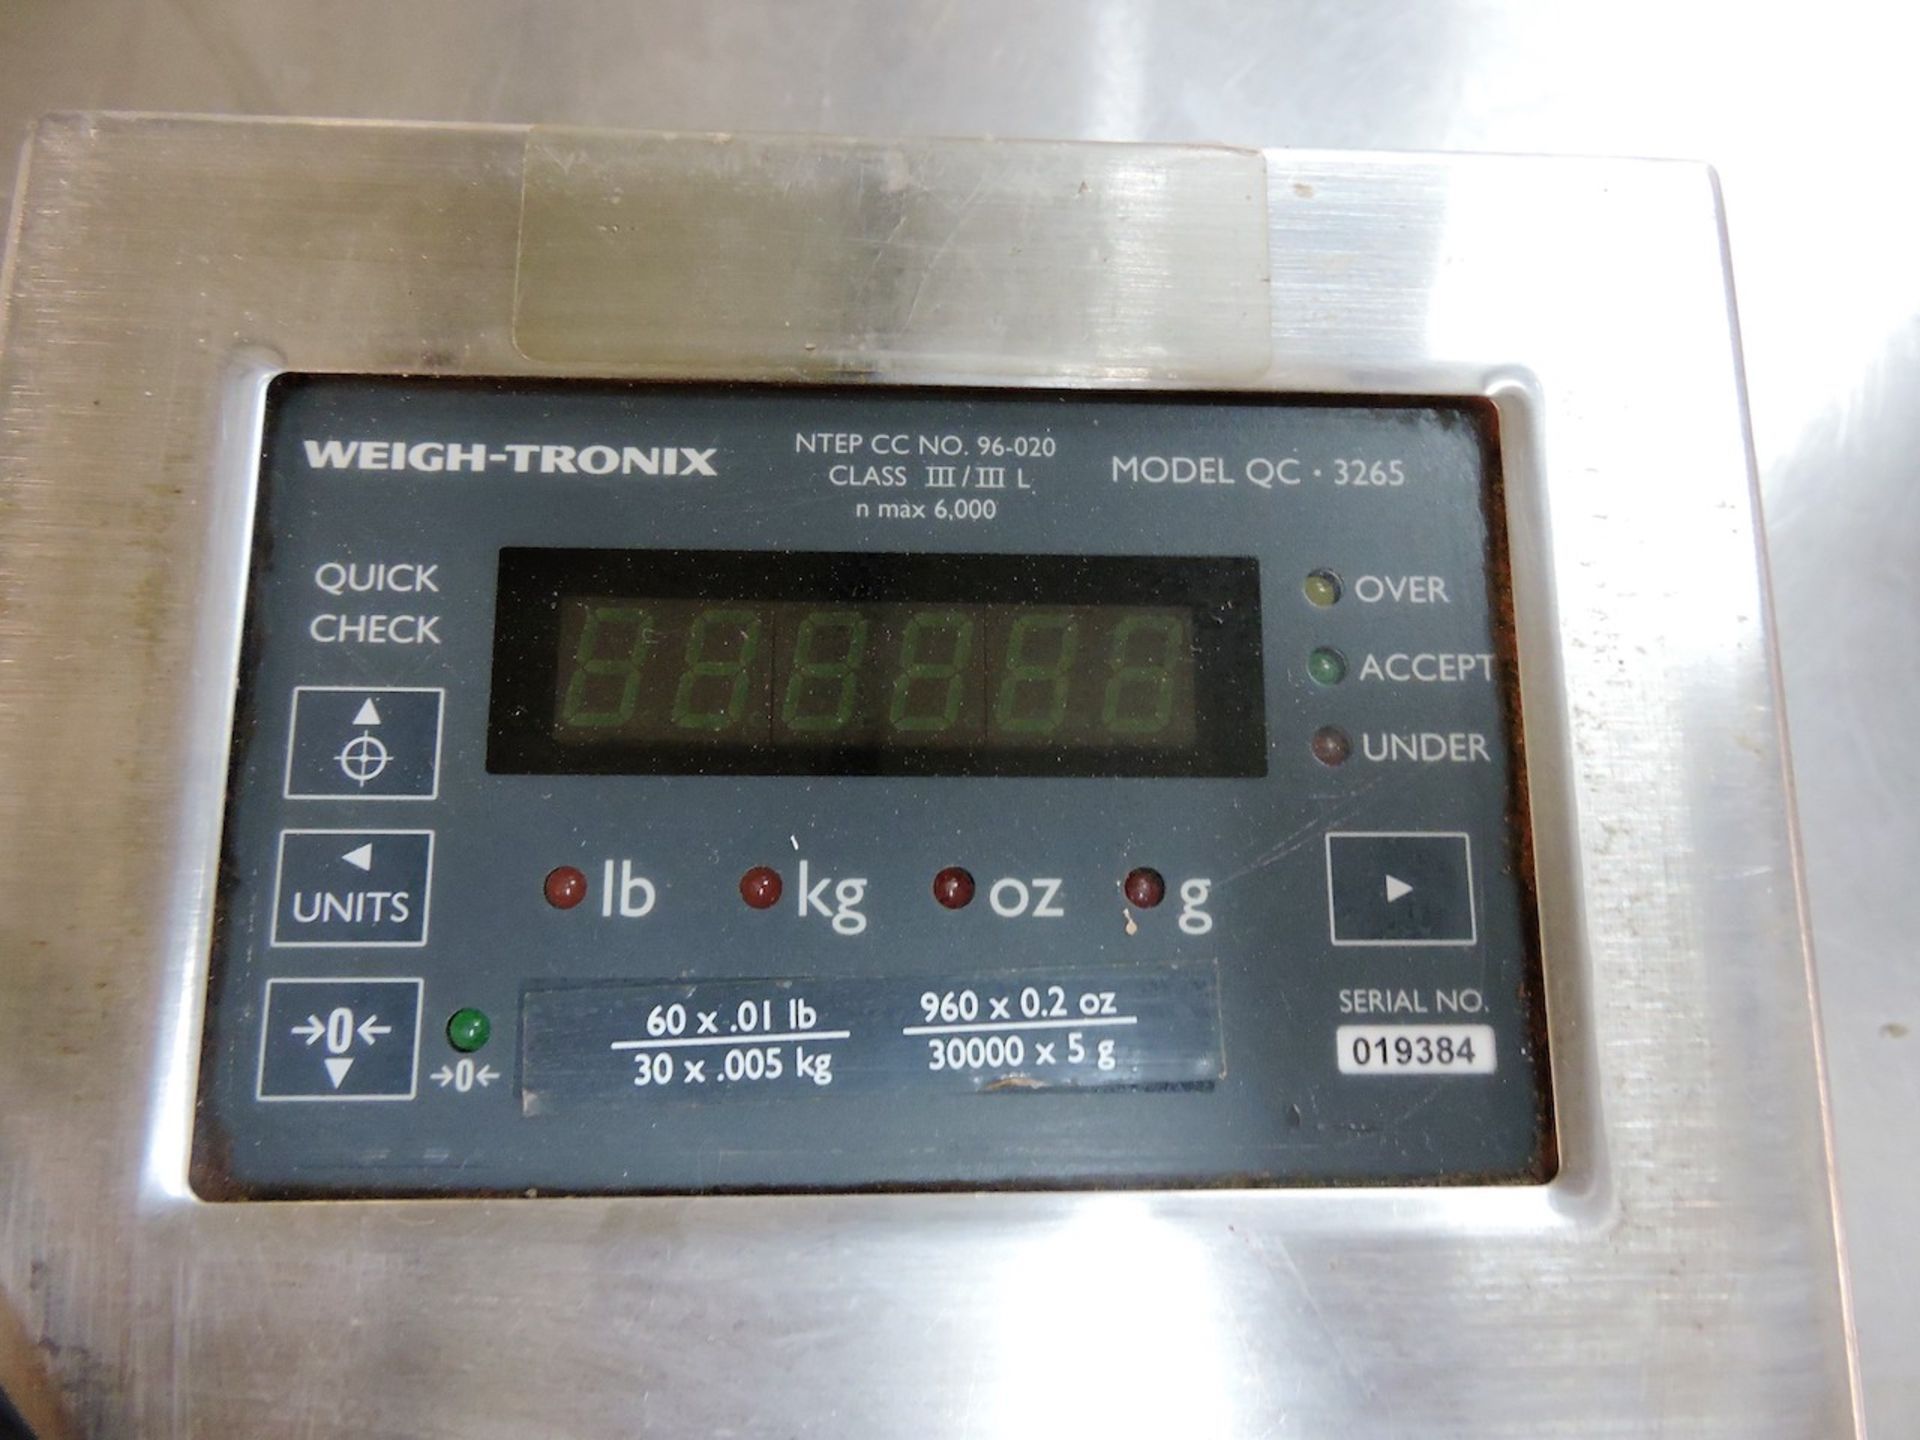 WEIGHTRONIX SCALE MODEL QC 3265 CLASS III N MAX 6000, - Image 2 of 2